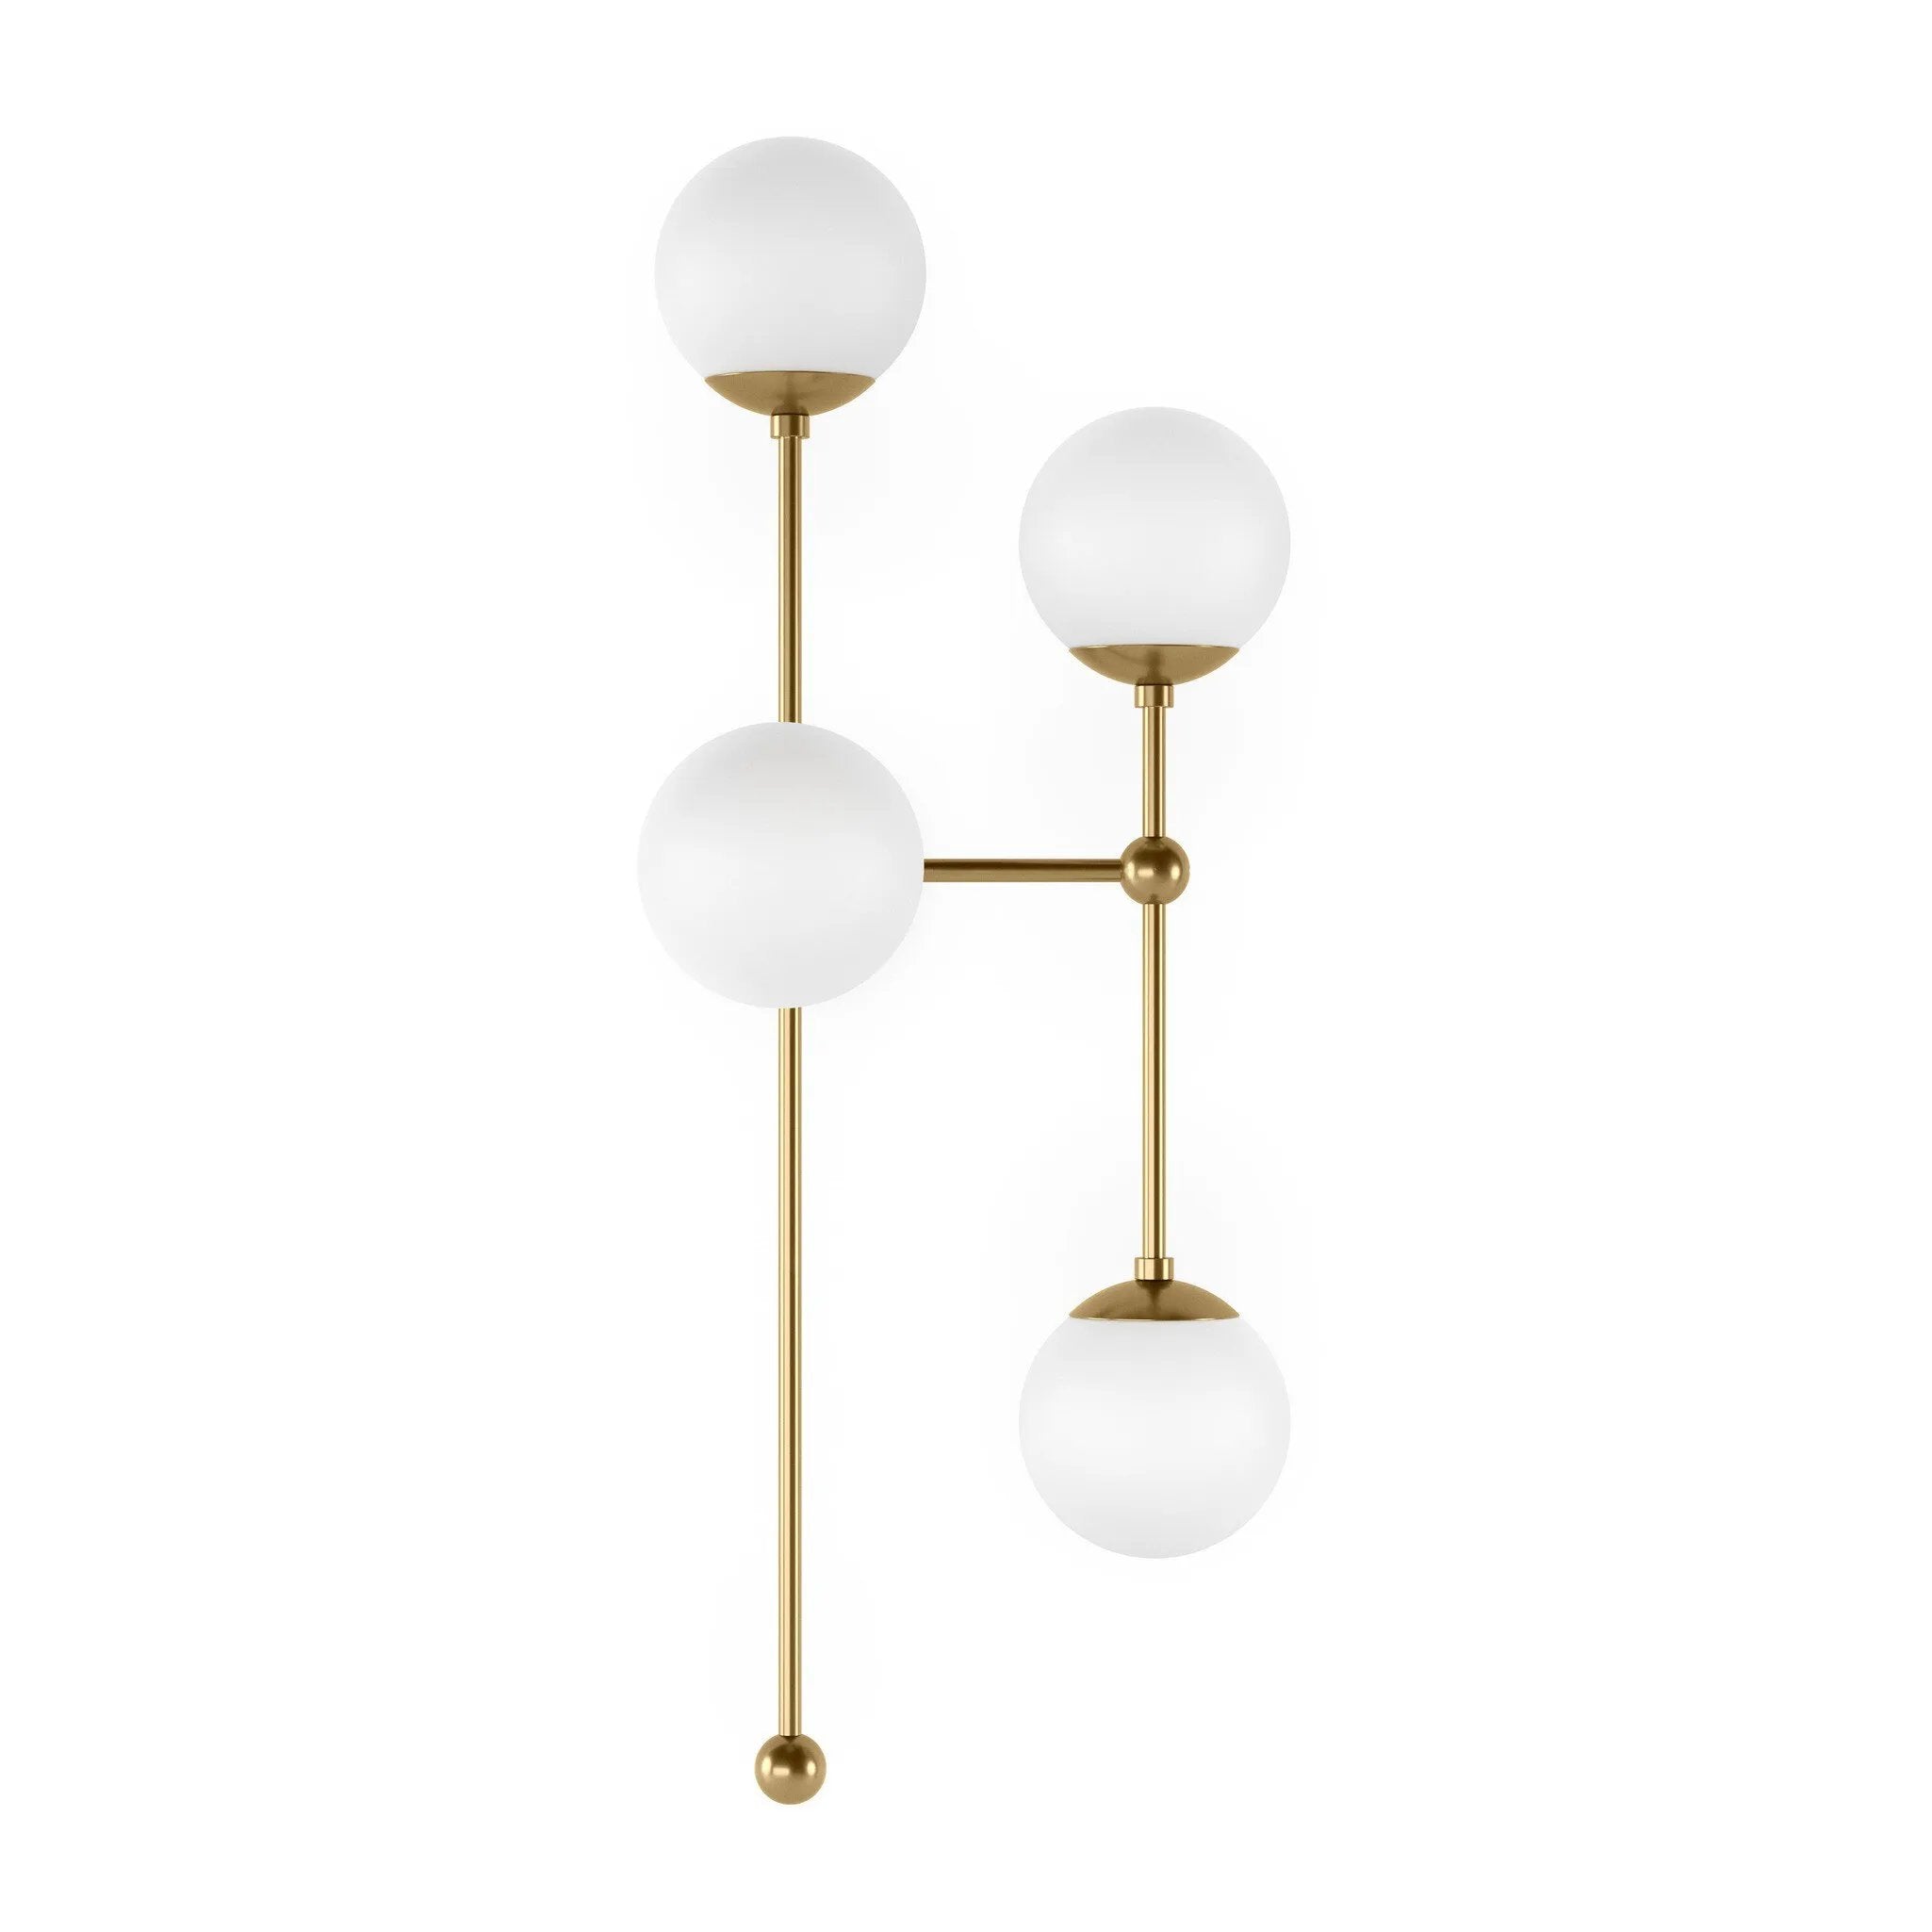 Matte glass spheres seem to extend and reach across smooth brass rods. Each globe is individually blown, shaped and sculpted by hand through a one-hour process. Matte globes are specially manufactured to evenly diffuse light. Brass and glass are 98% recyclable. Designed and sustainably made in Poland by Schwung.Overall Dimensions13.75"w x 13. Amethyst Home provides interior design, new home construction design consulting, vintage area rugs, and lighting in the Scottsdale metro area.